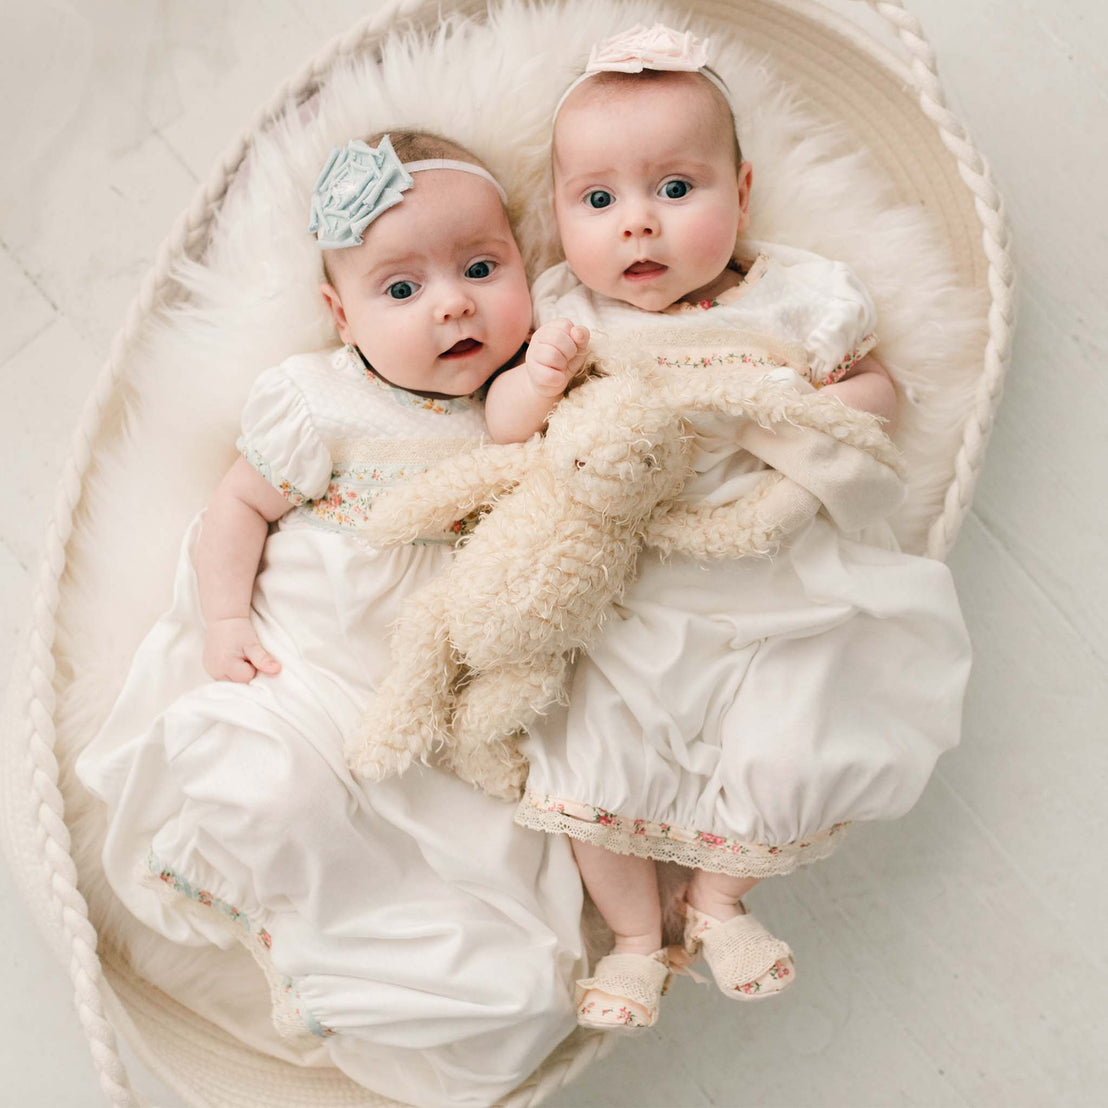 Two twin baby newborn girls with the Eloise Bunny, a super soft stuffed animal with a tan scraggly fur body.